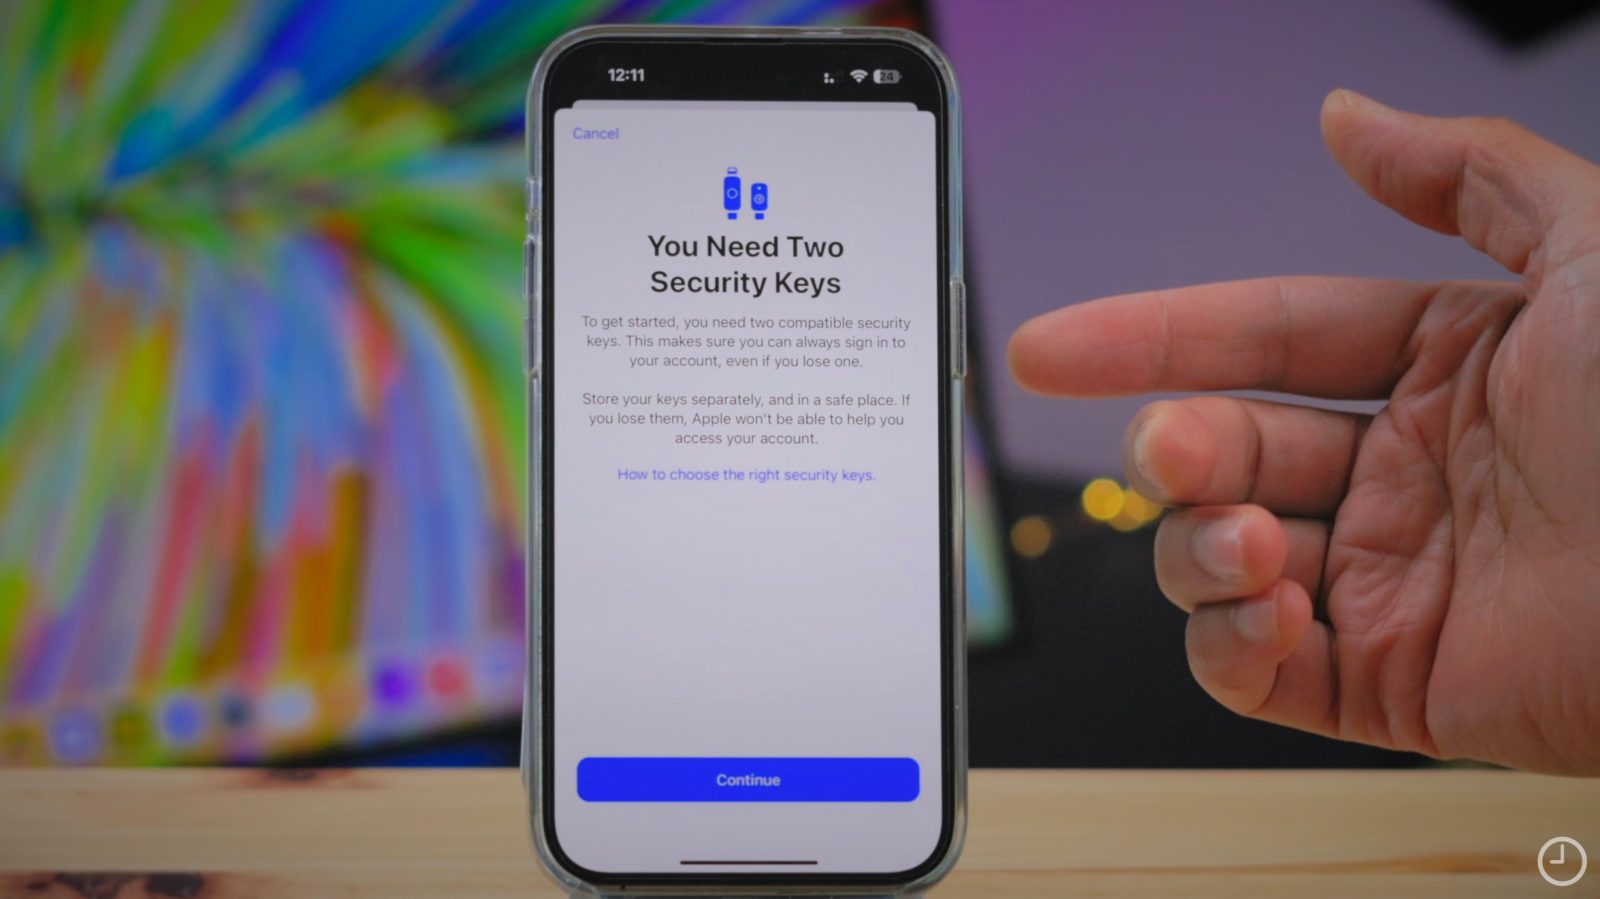 Security keys Apple recommends